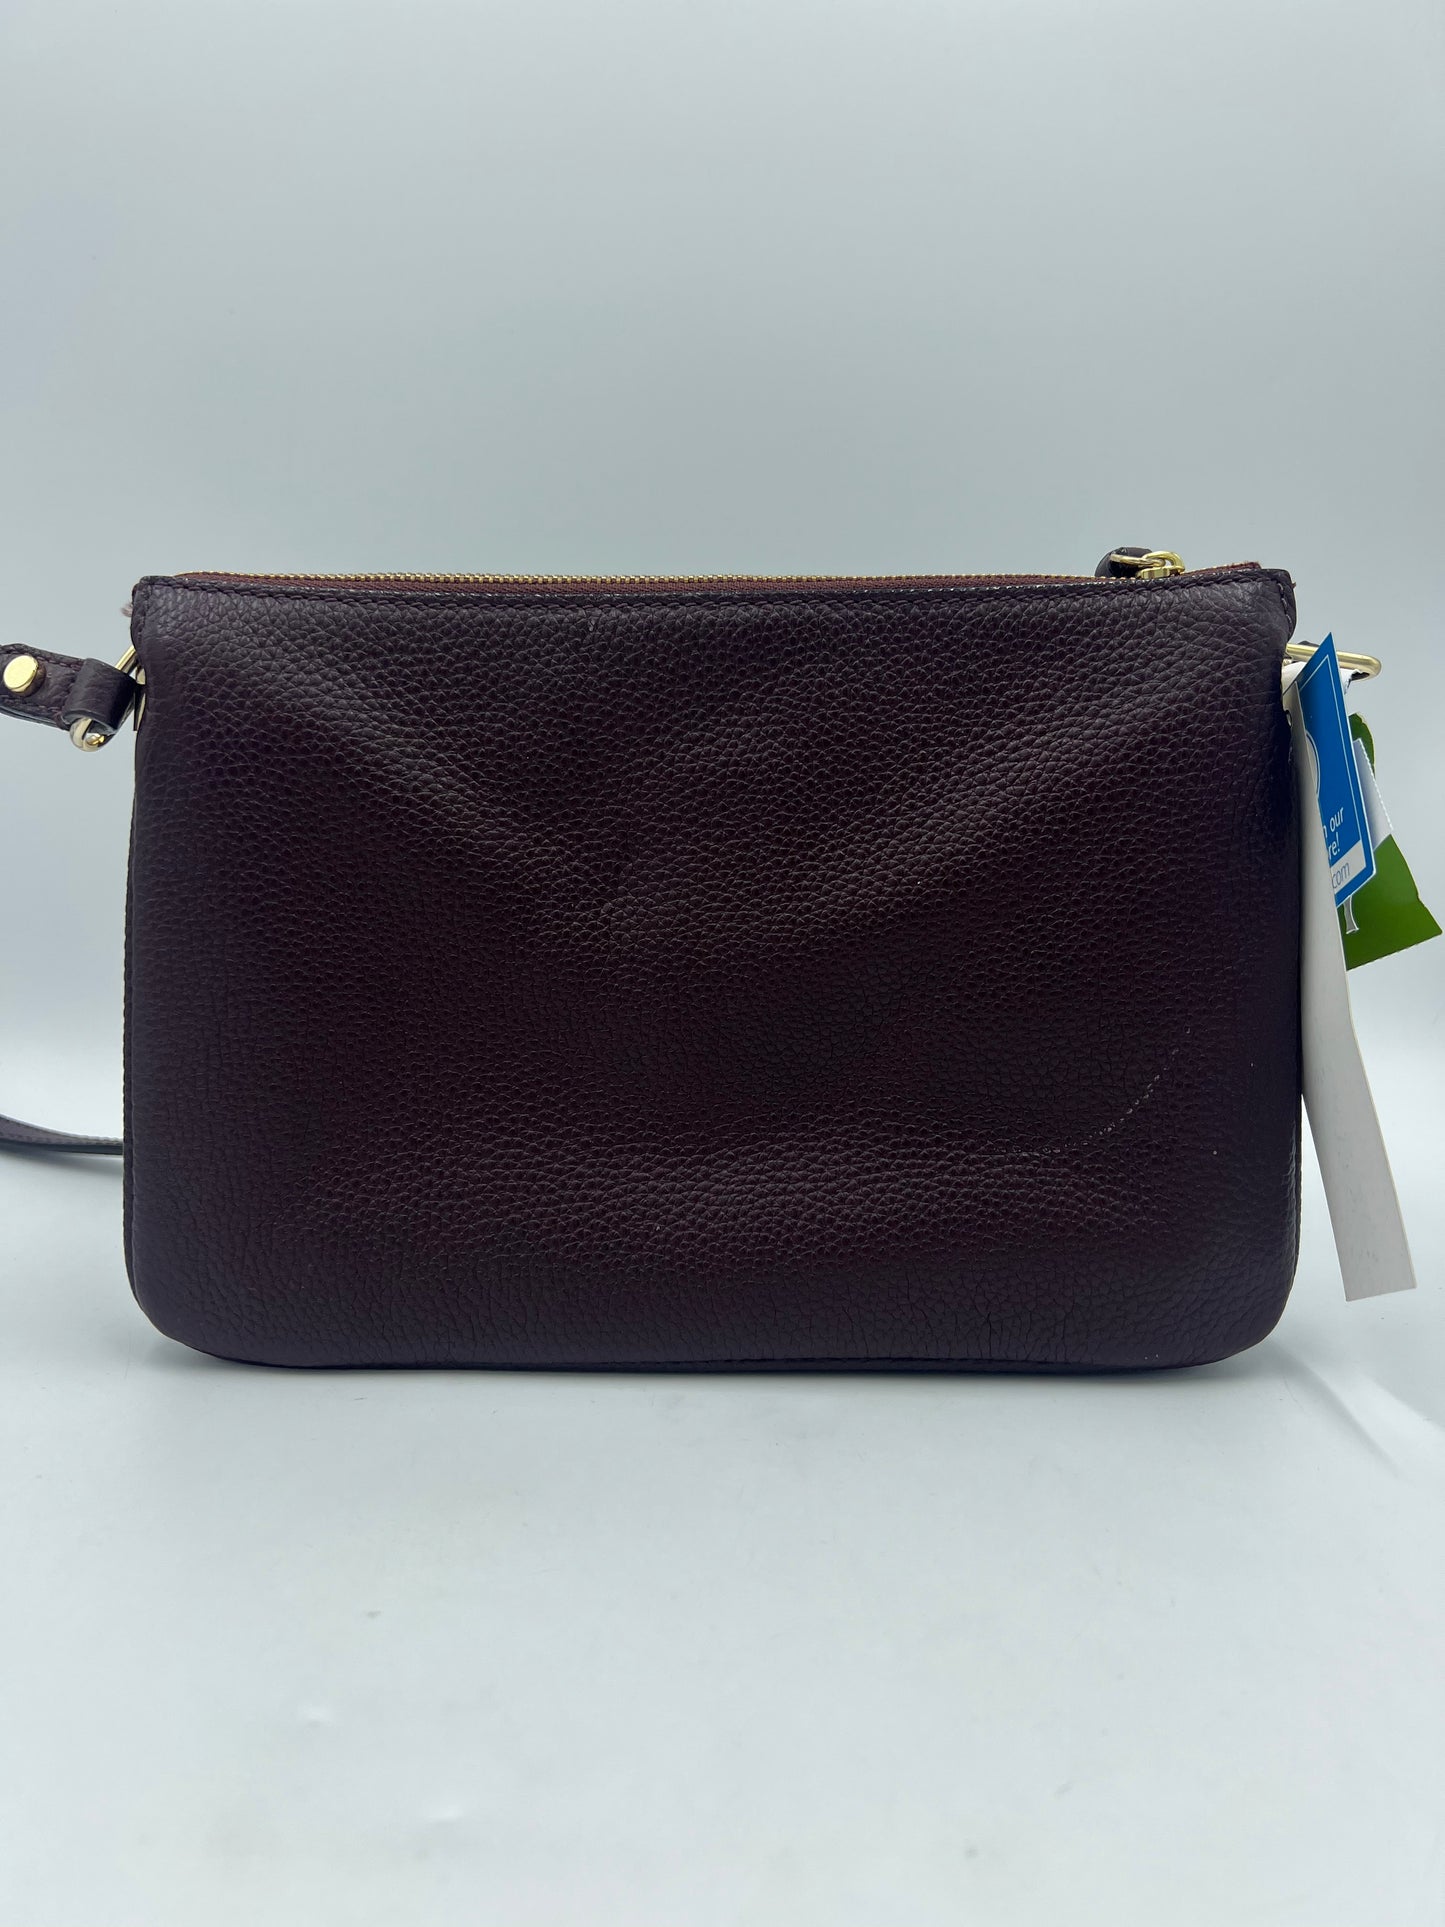 New! Leather Crossbody Designer By Kate Spade